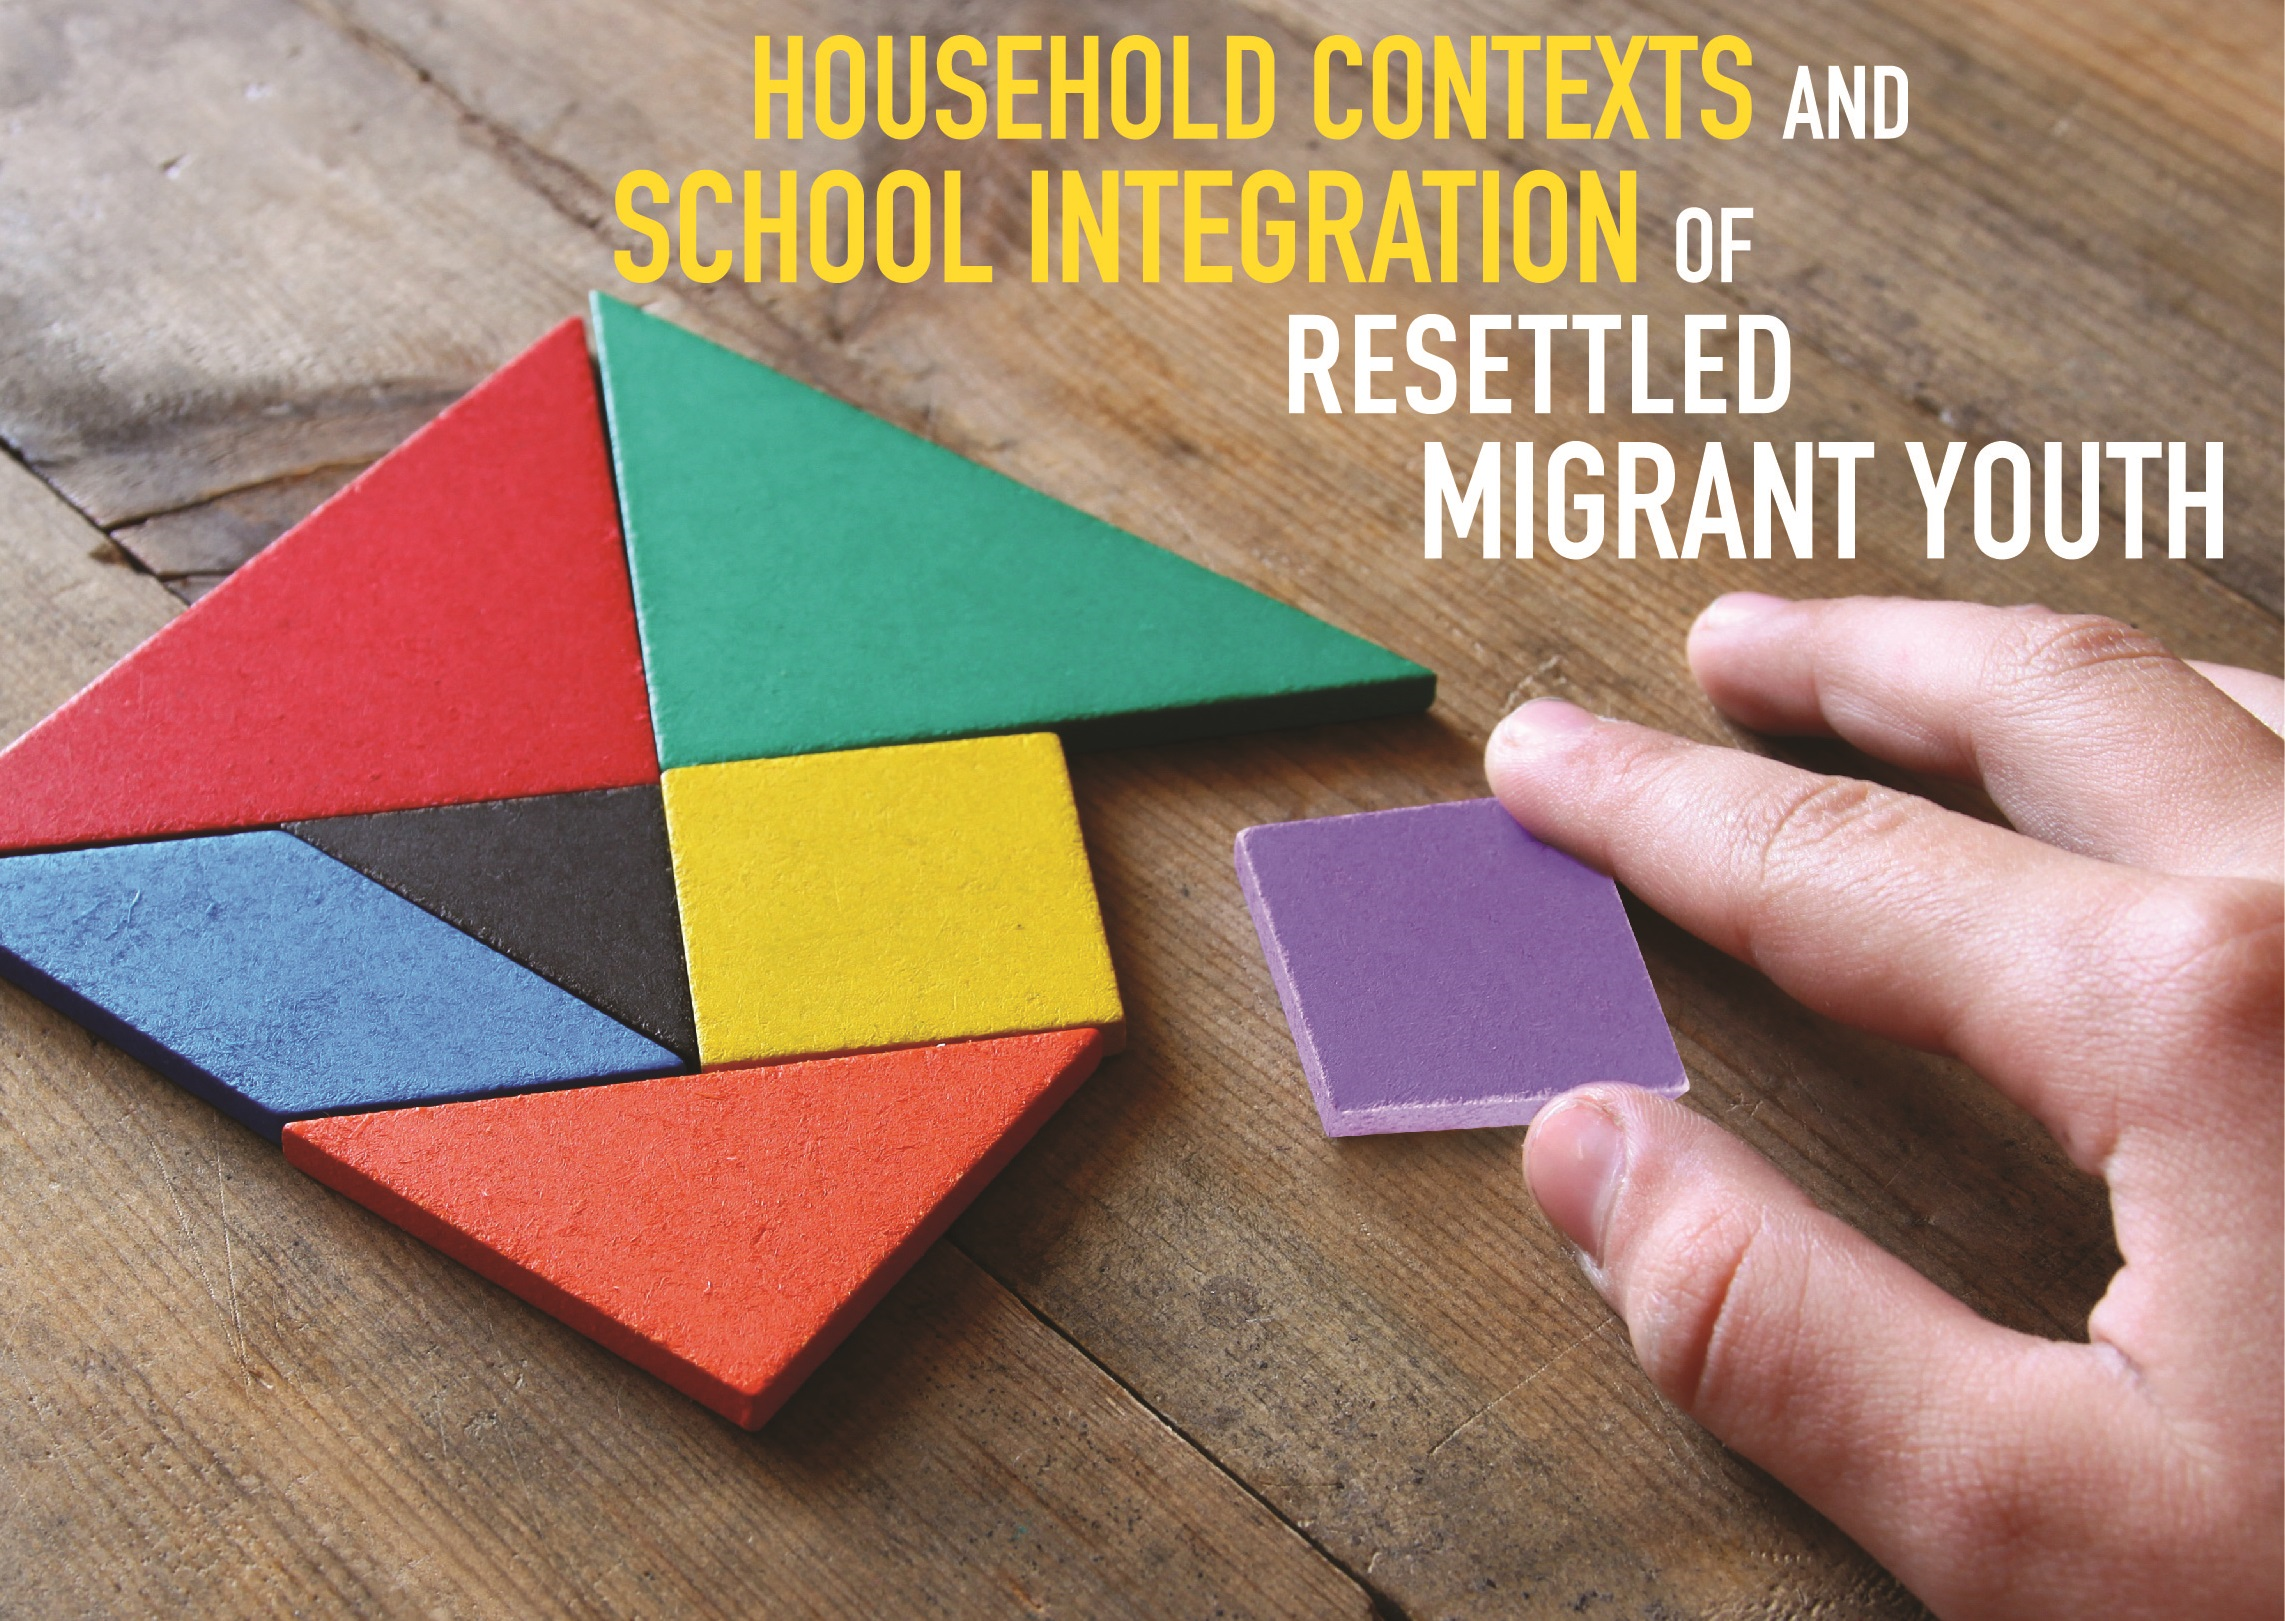 Household Contexts and School Integration of Resettled Migrant Youth